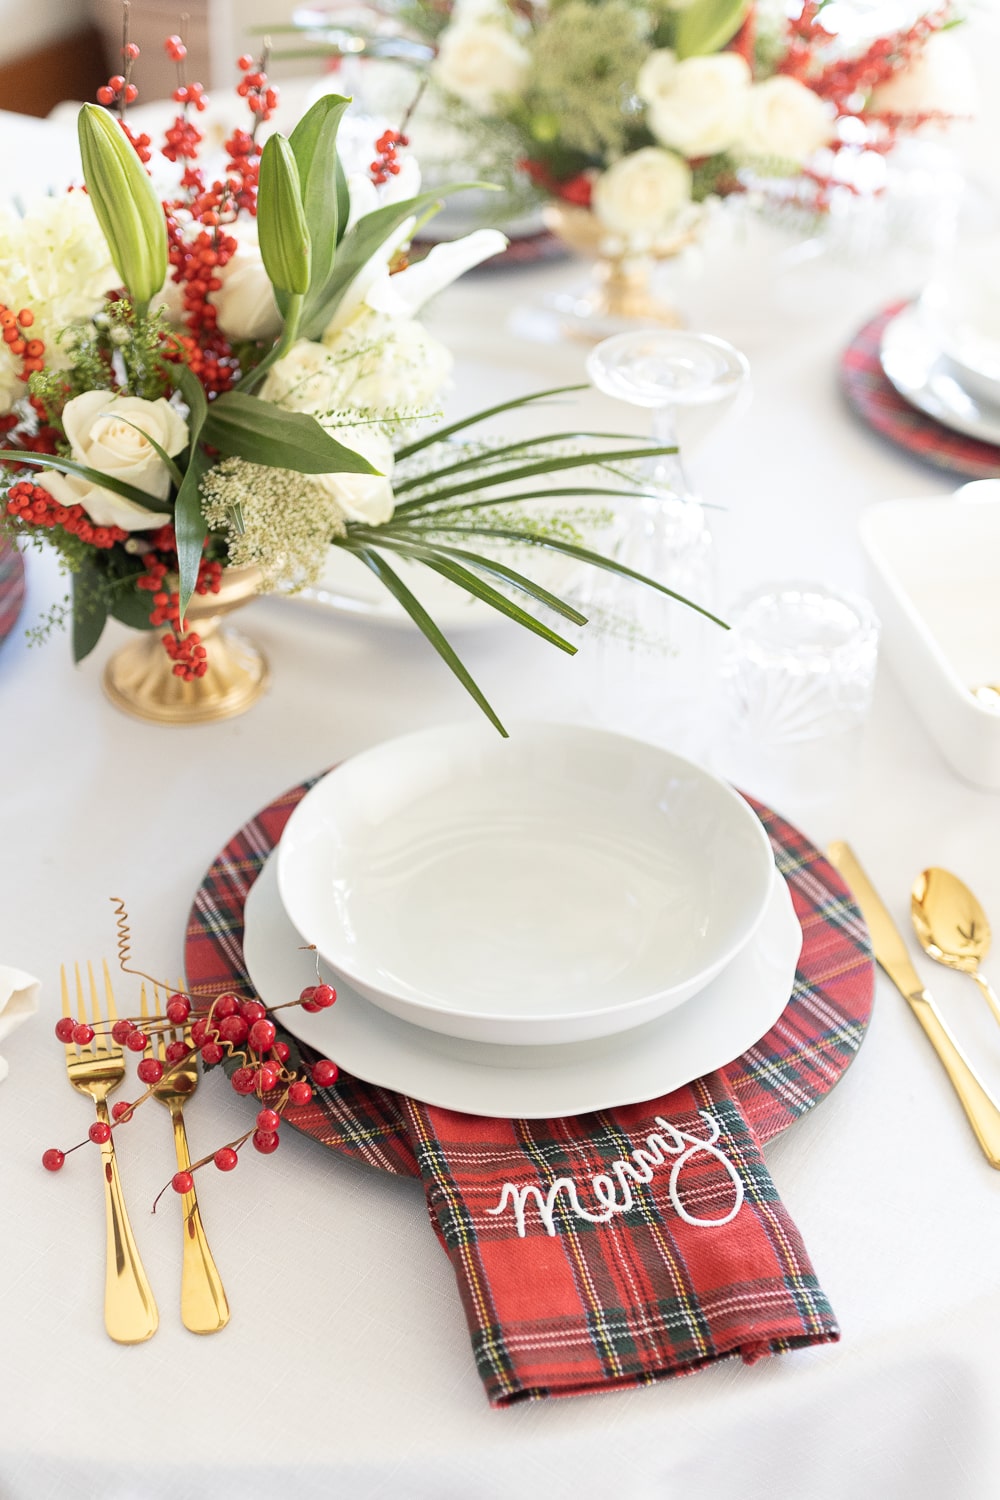 Simple holiday tablescape designed by blogger Stephanie Ziajka on Diary of a Debutante